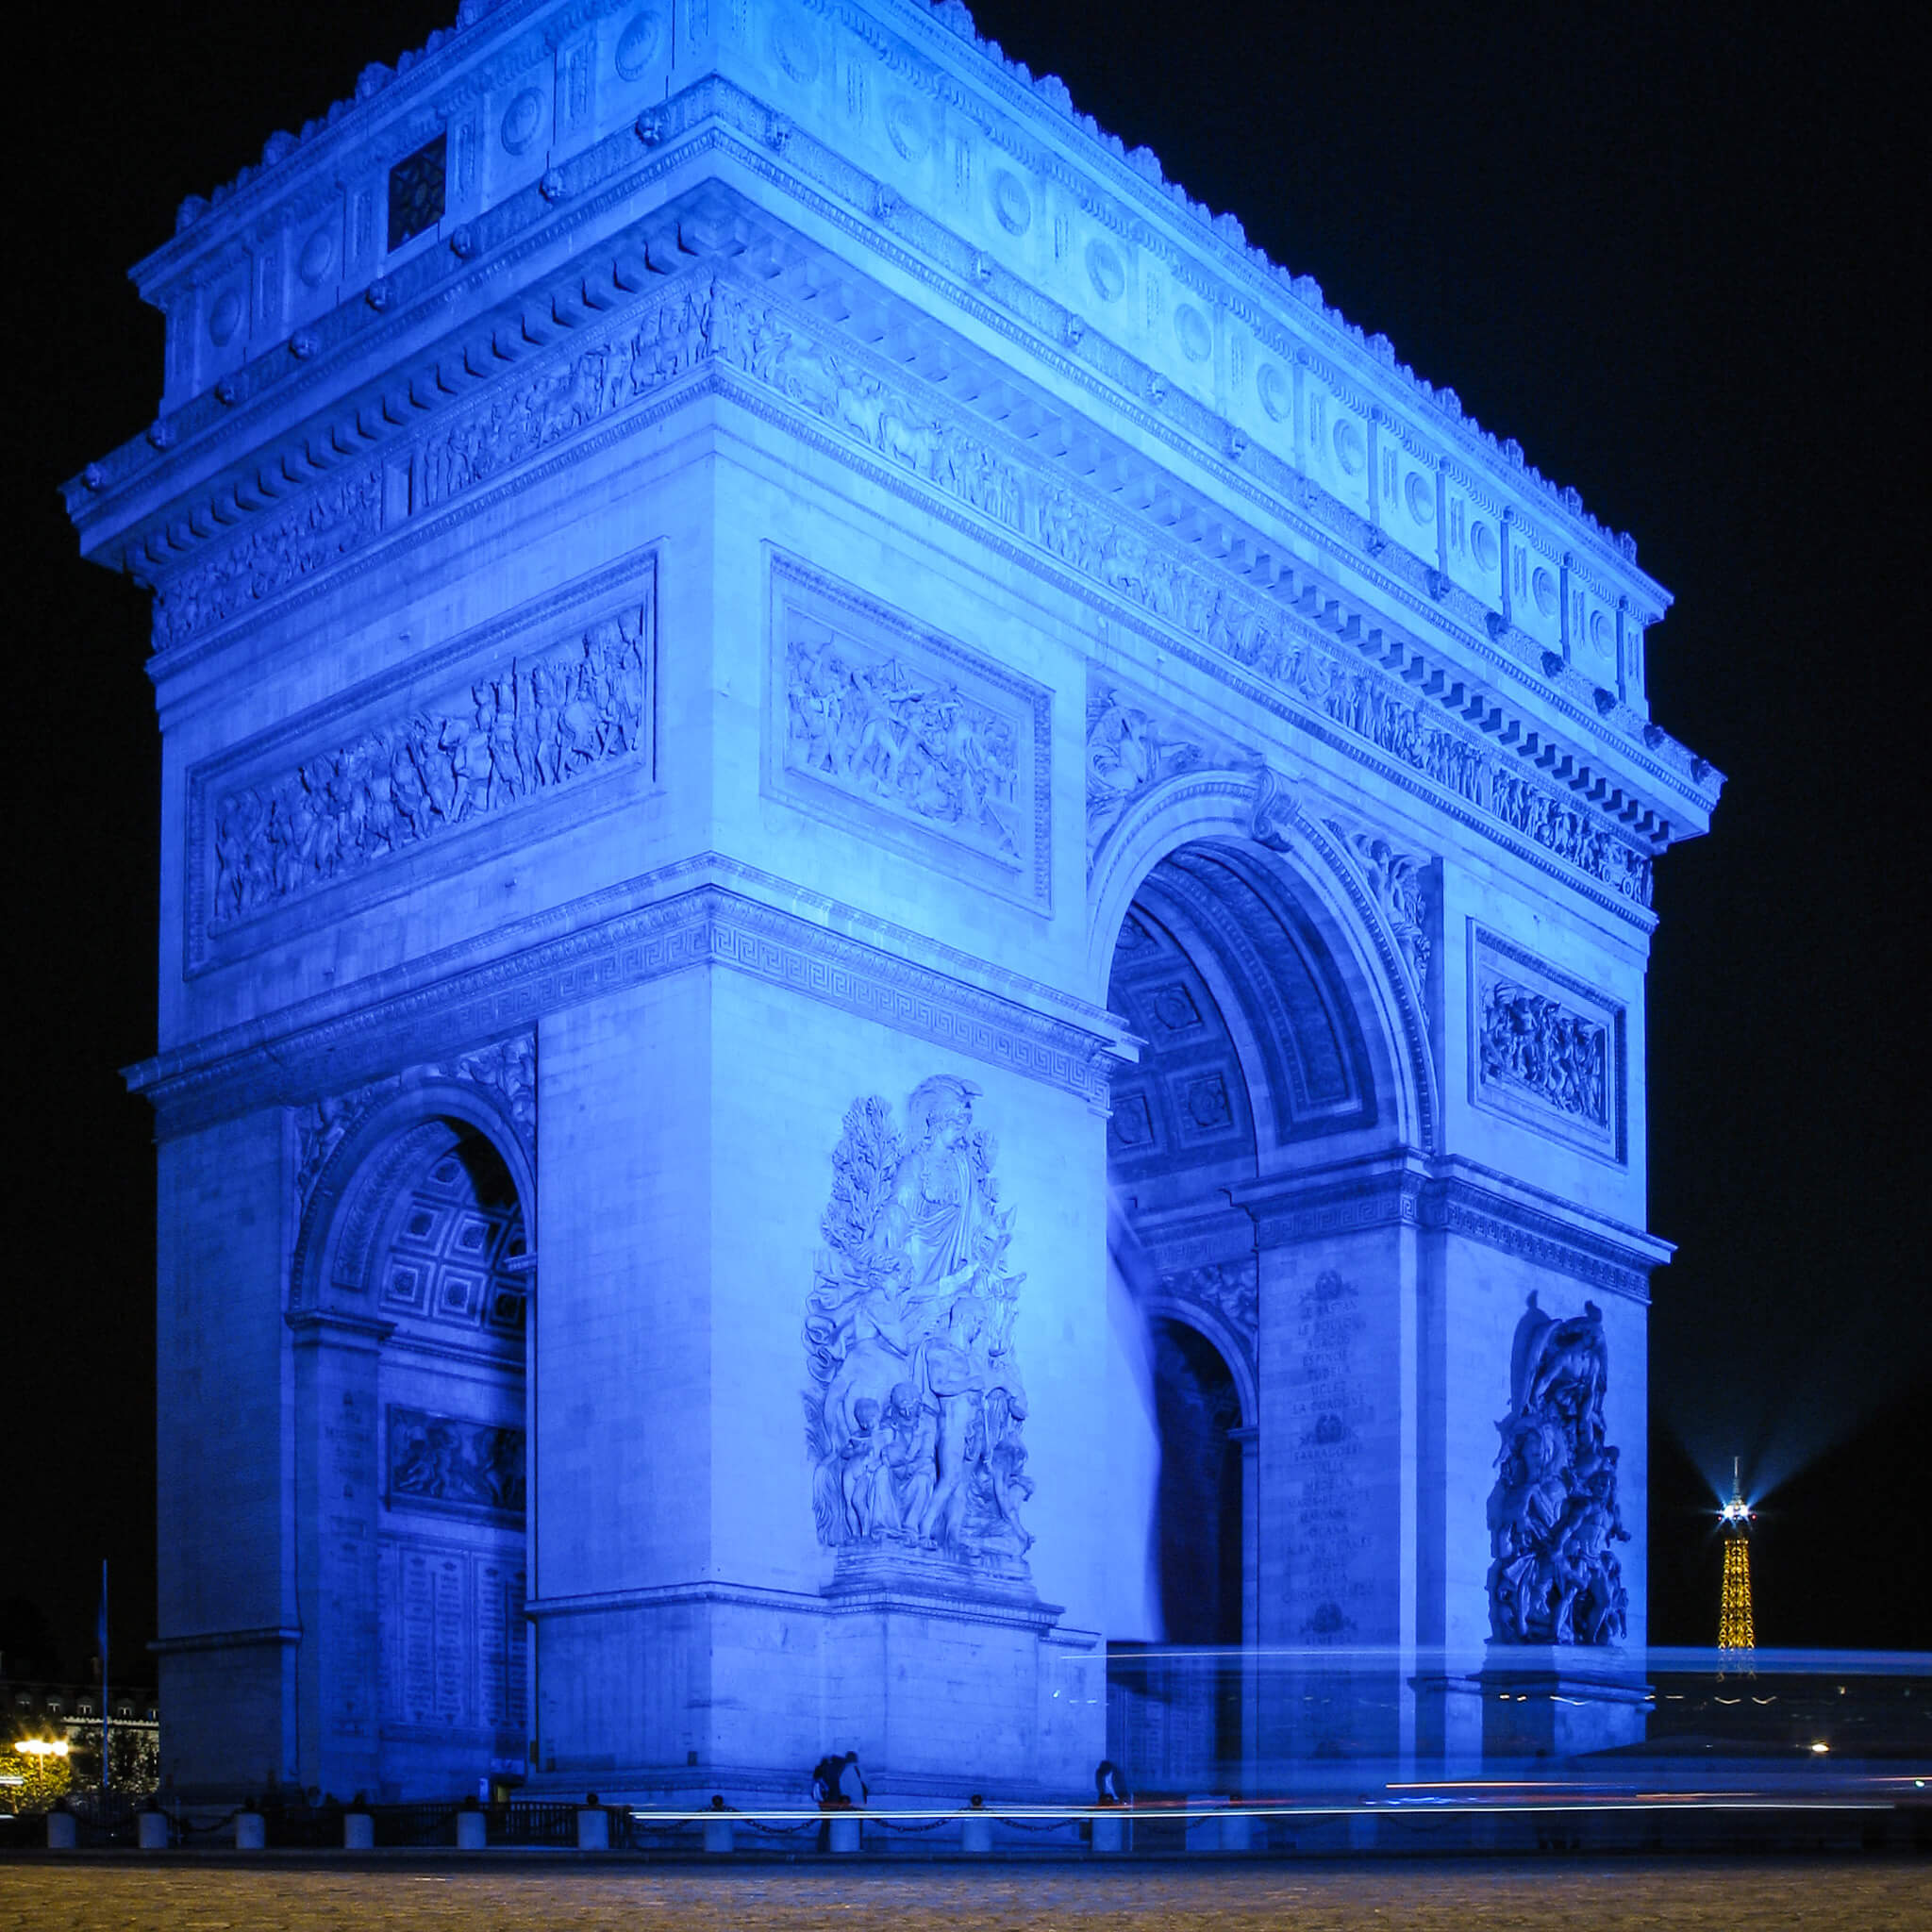 The Arc de Triomphe at night, lit up in blue